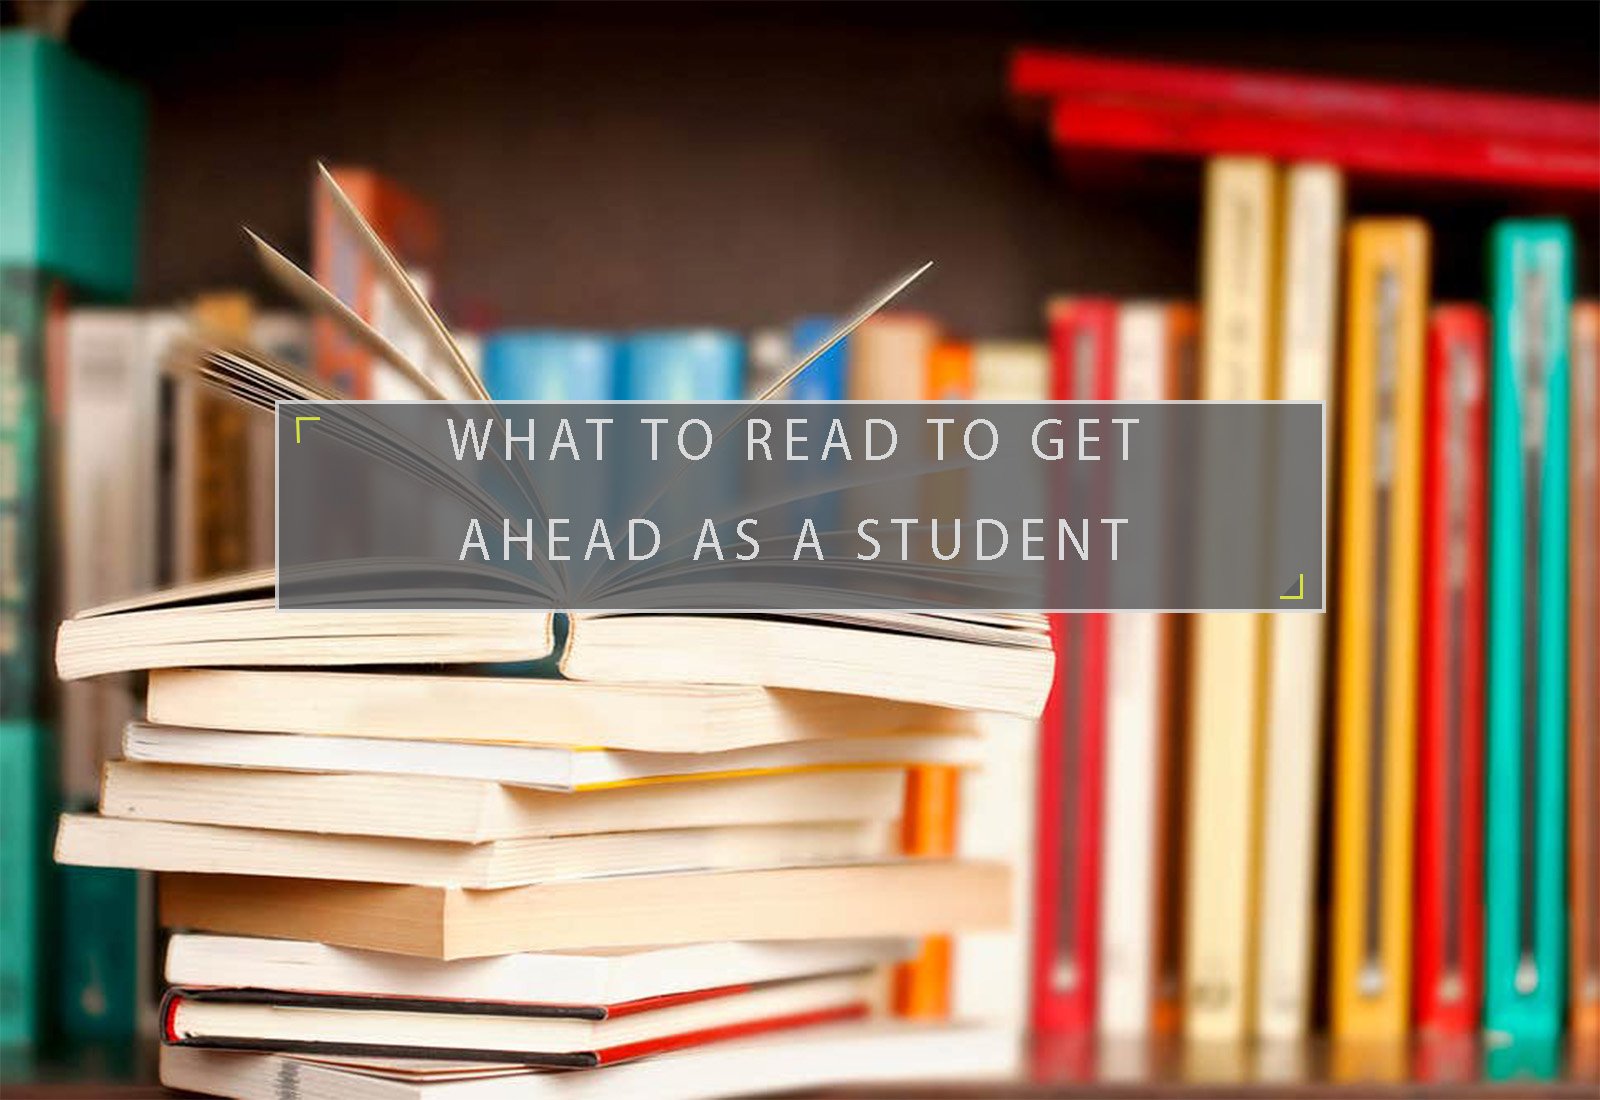 Books to read to get ahead as a student